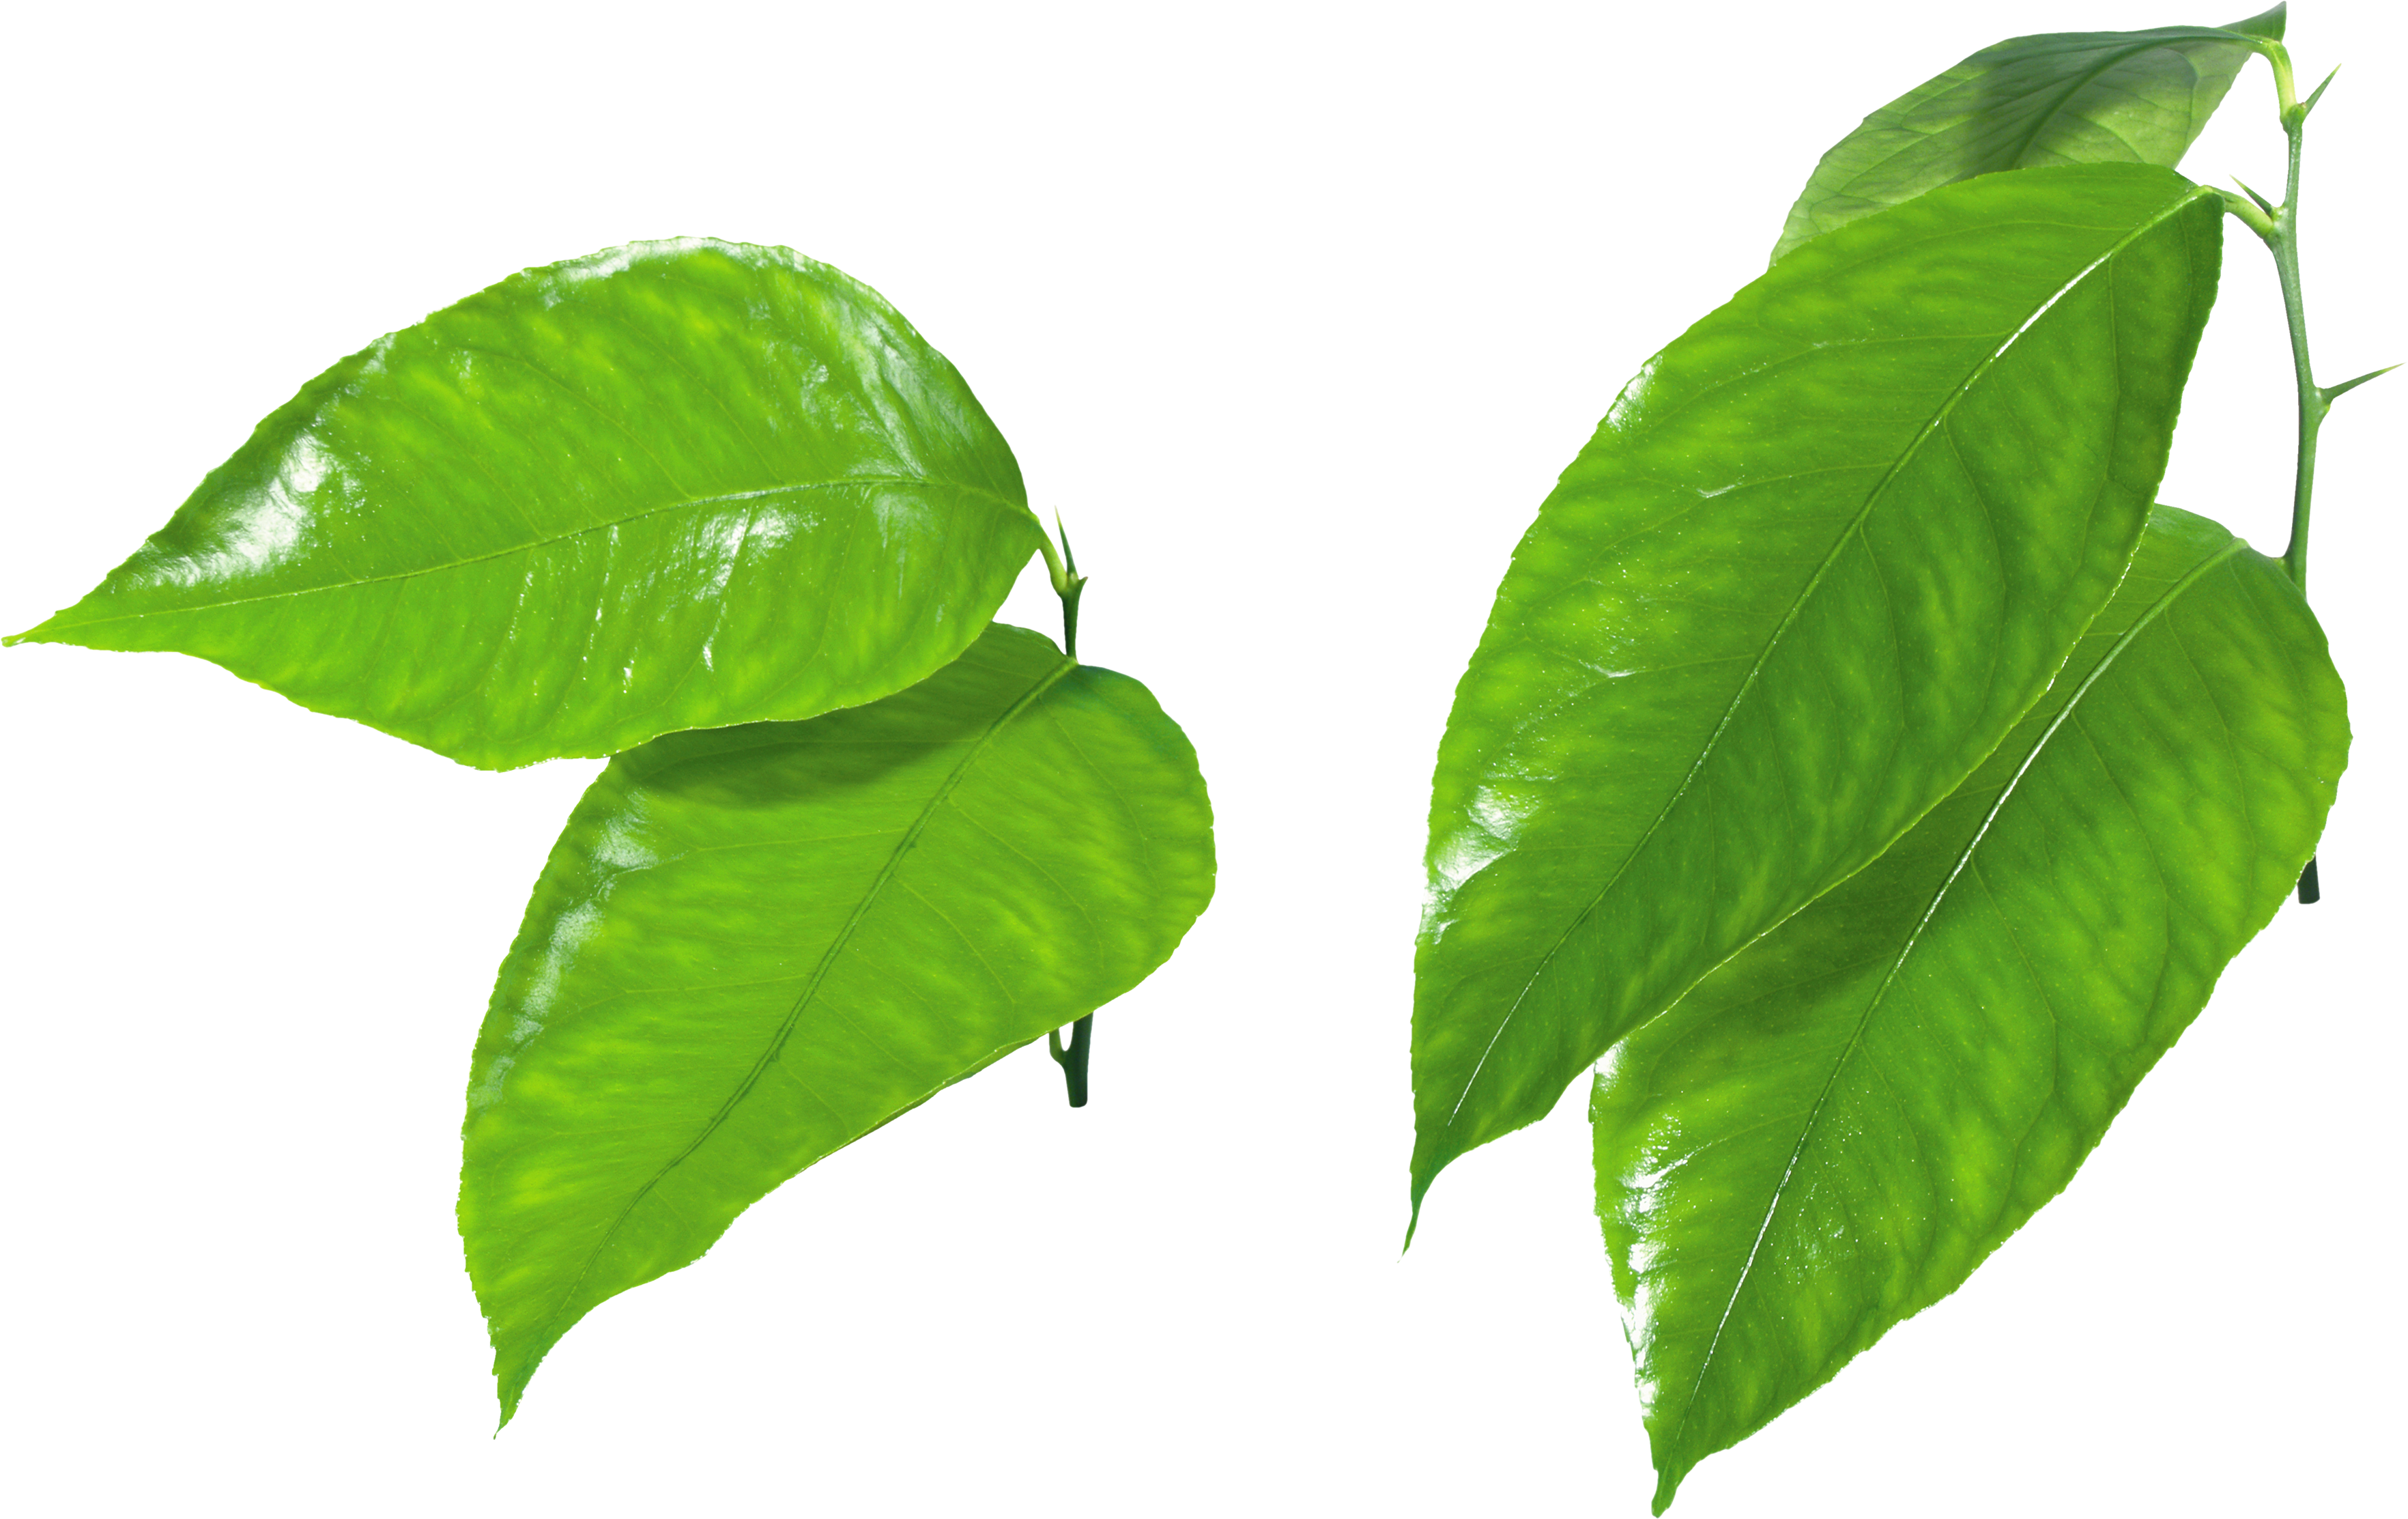 Green Organic Leafs Free Transparent Image HQ PNG Image